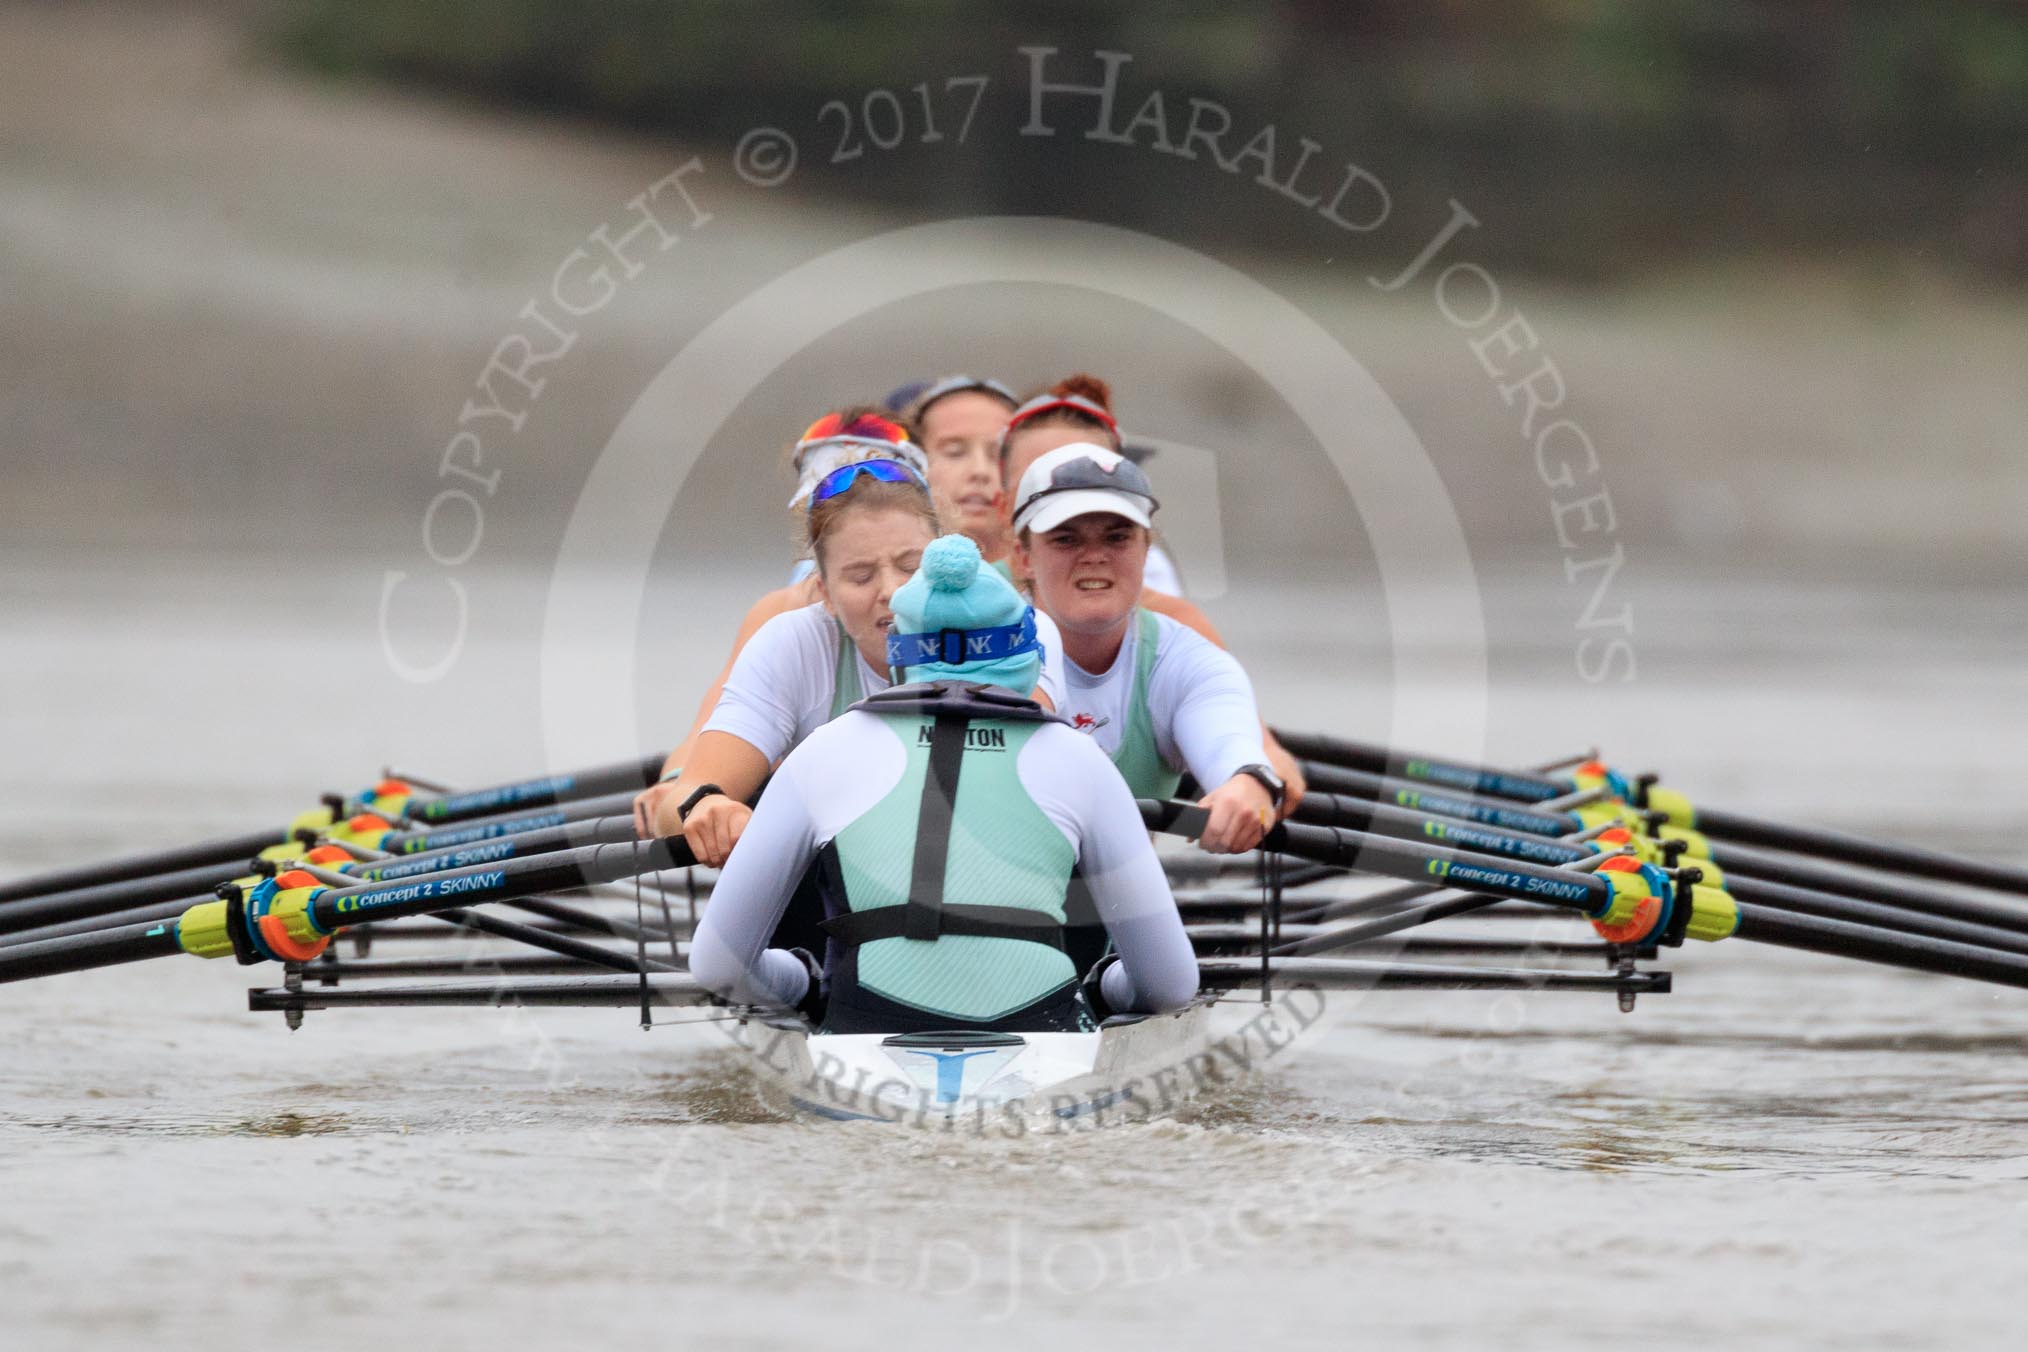 The Boat Race season 2018 - Women's Boat Race Trial Eights (CUWBC, Cambridge): Expecto Patronum:  Cox-Sophie Shapter, stroke-Alice White,  7-Abigail Parker, 6-Thea Zabell, 5-Kelsey Barolak, 4-Laura Foster, 3-Sally O Brien, 2-Millie Perrin, bow-Eve Caroe.
River Thames between Putney Bridge and Mortlake,
London SW15,

United Kingdom,
on 05 December 2017 at 13:00, image #166